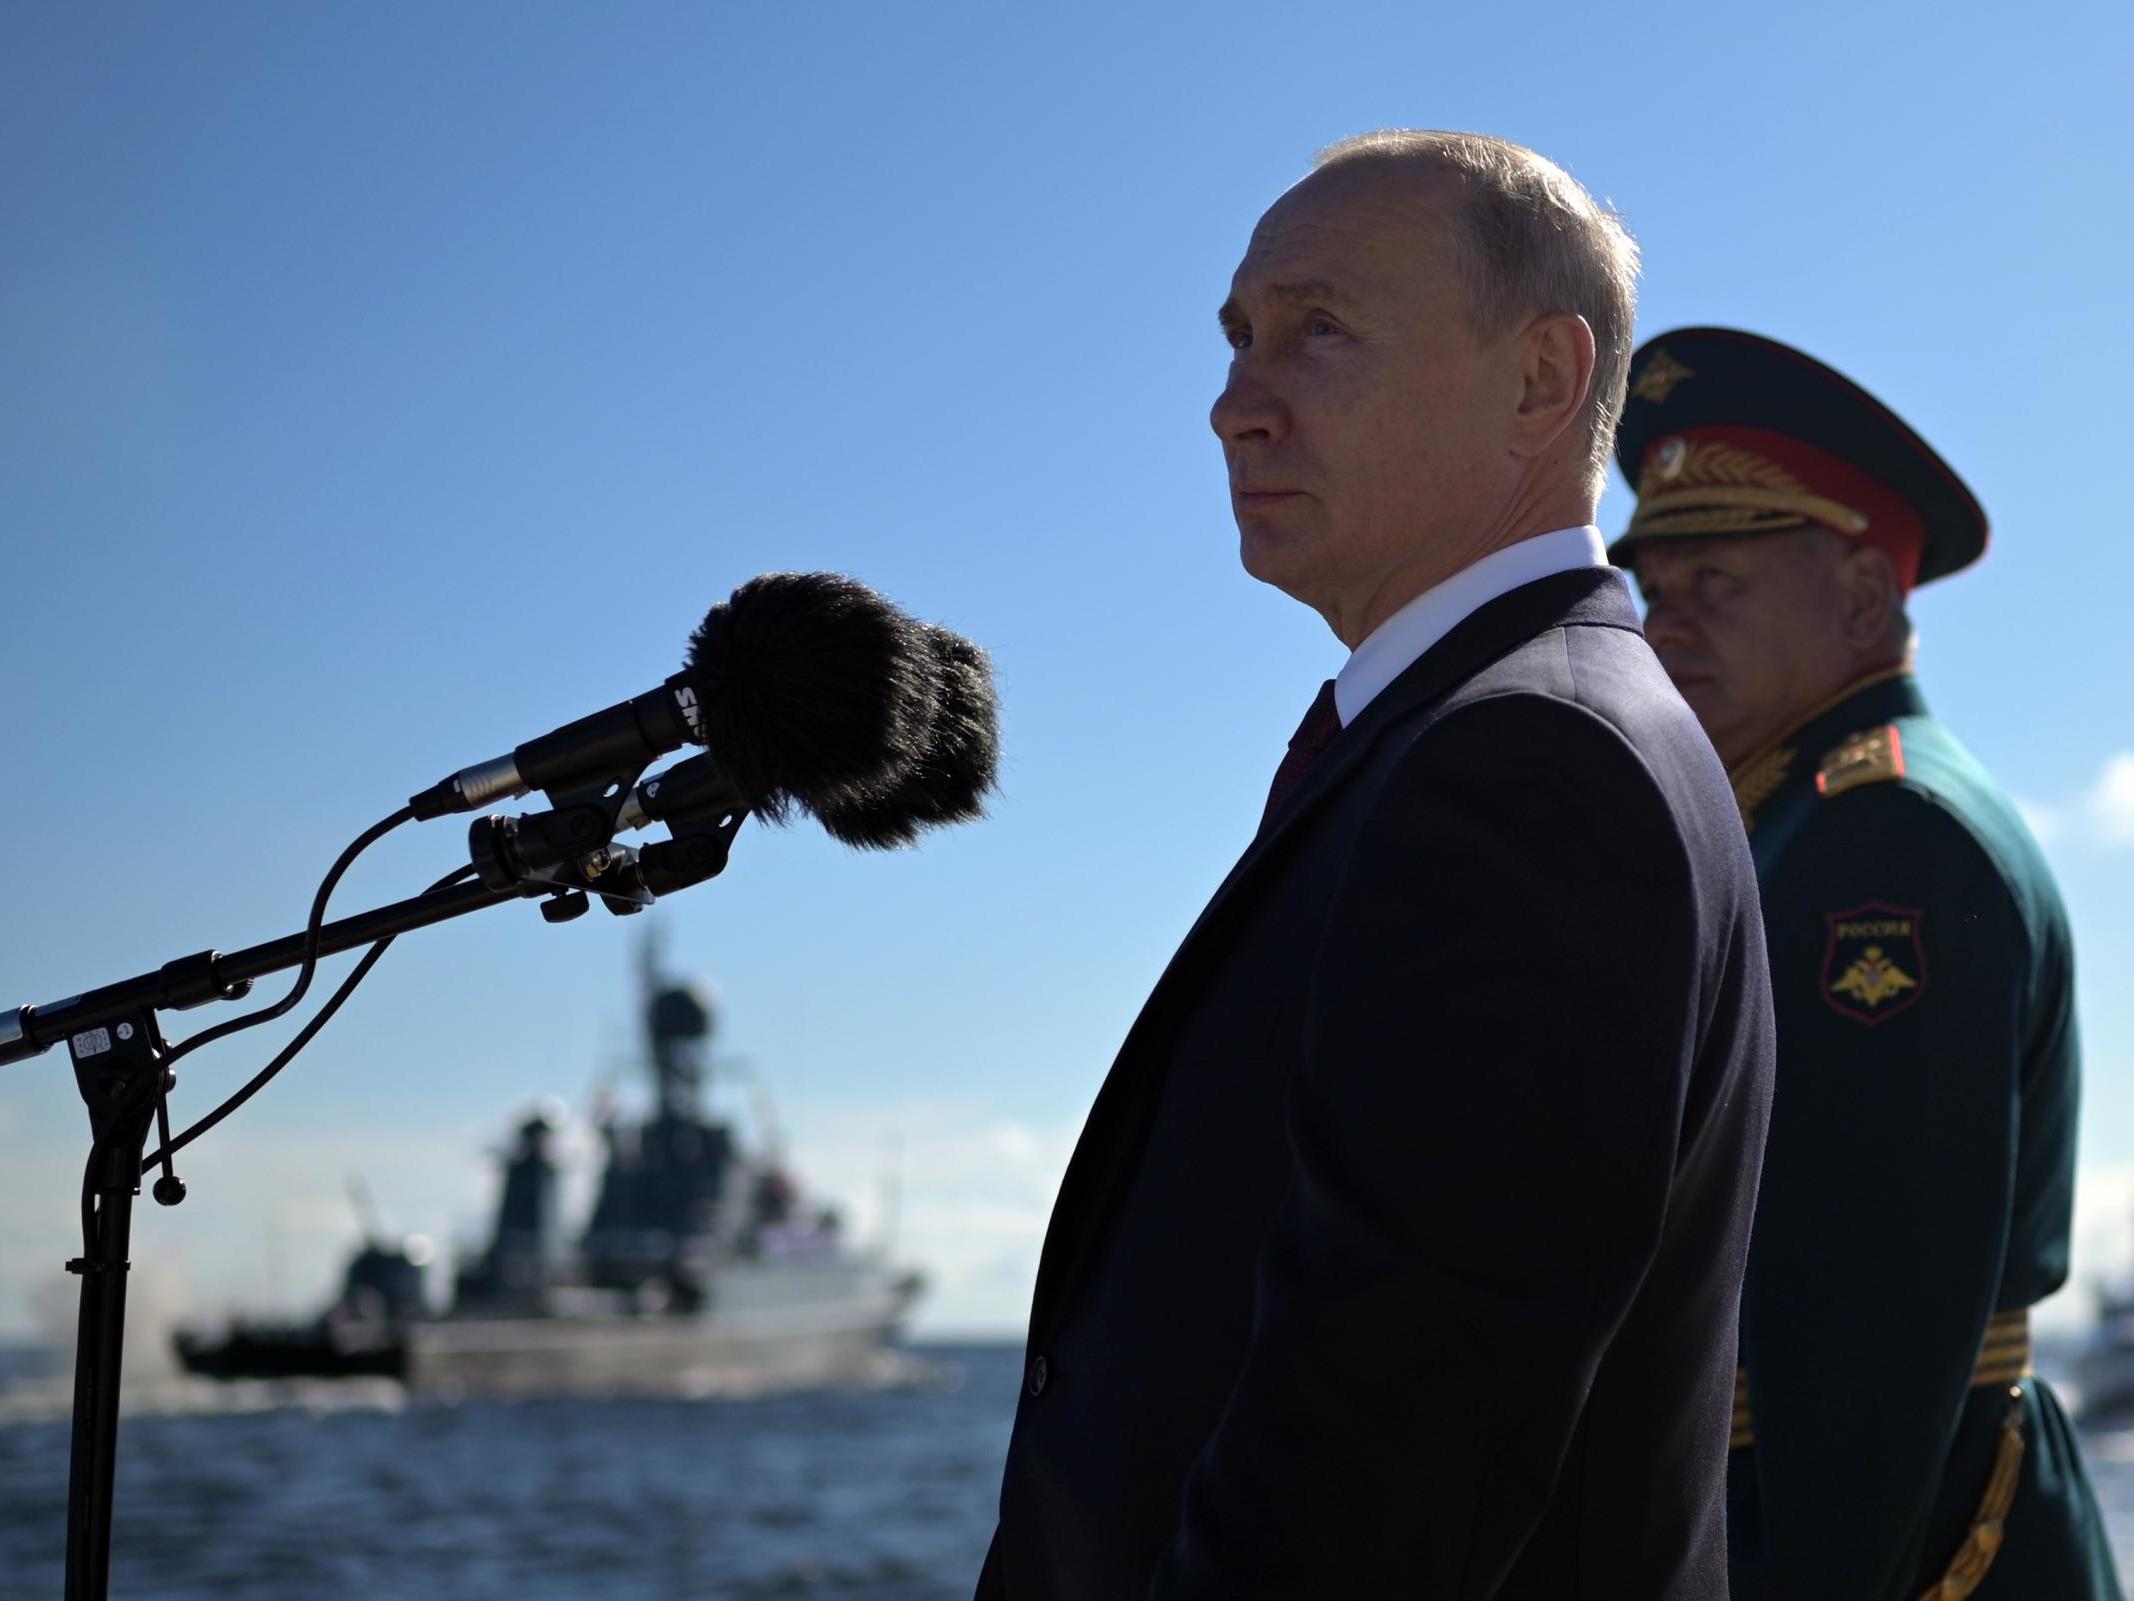 Russian president Vladimir Putin and defence minister Sergei Shoigu attend the 'Russia Navy Day' parade in St. Petersburg